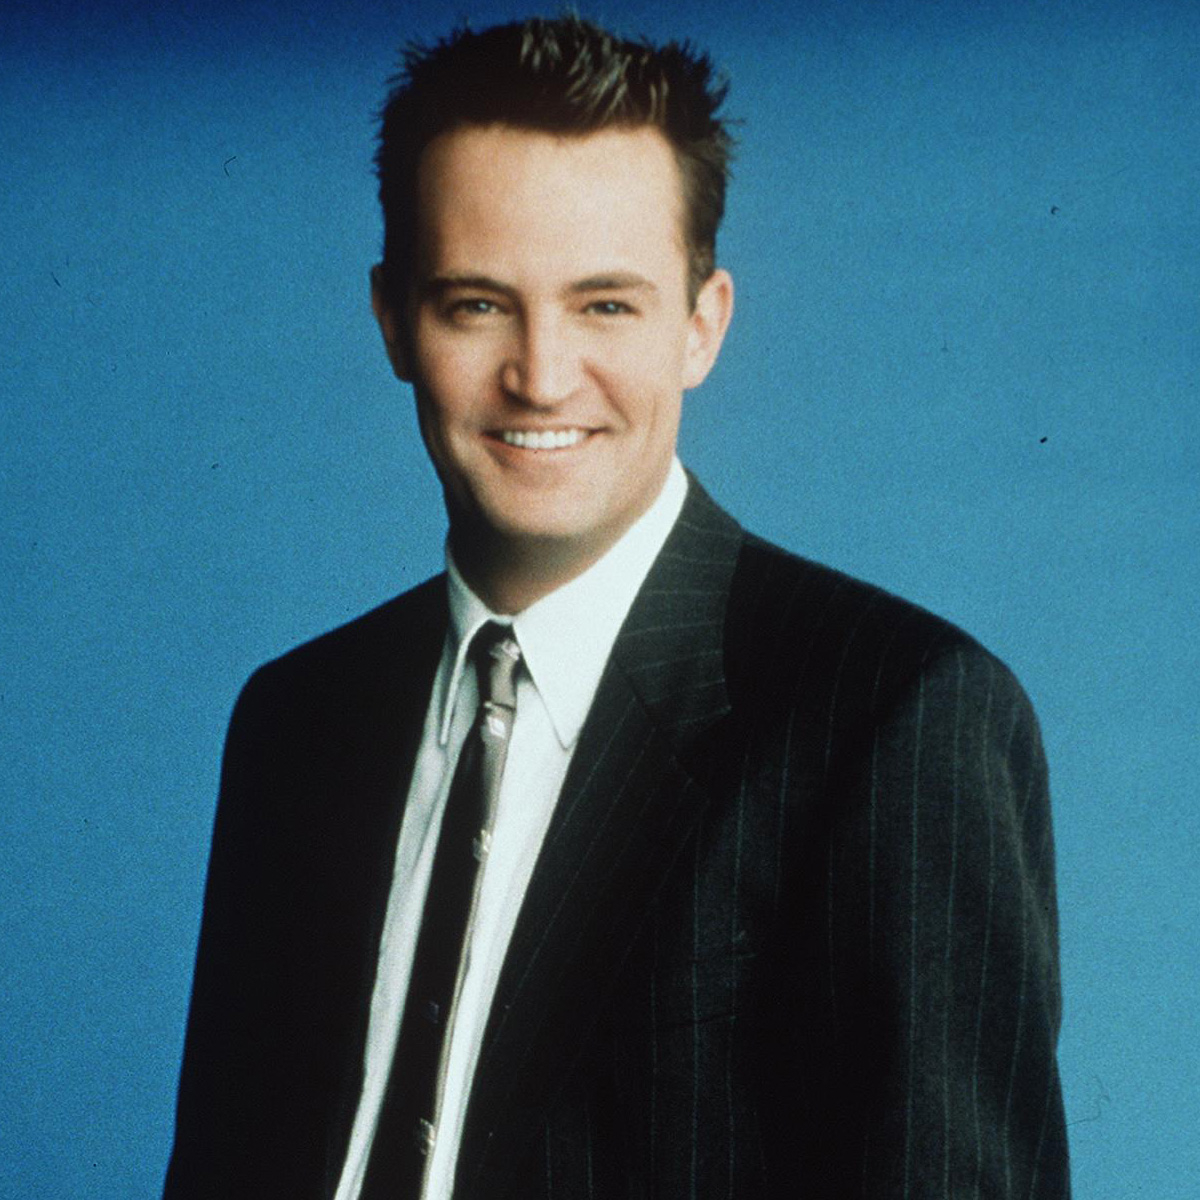 The Best Matthew Perry Episodes of Friends